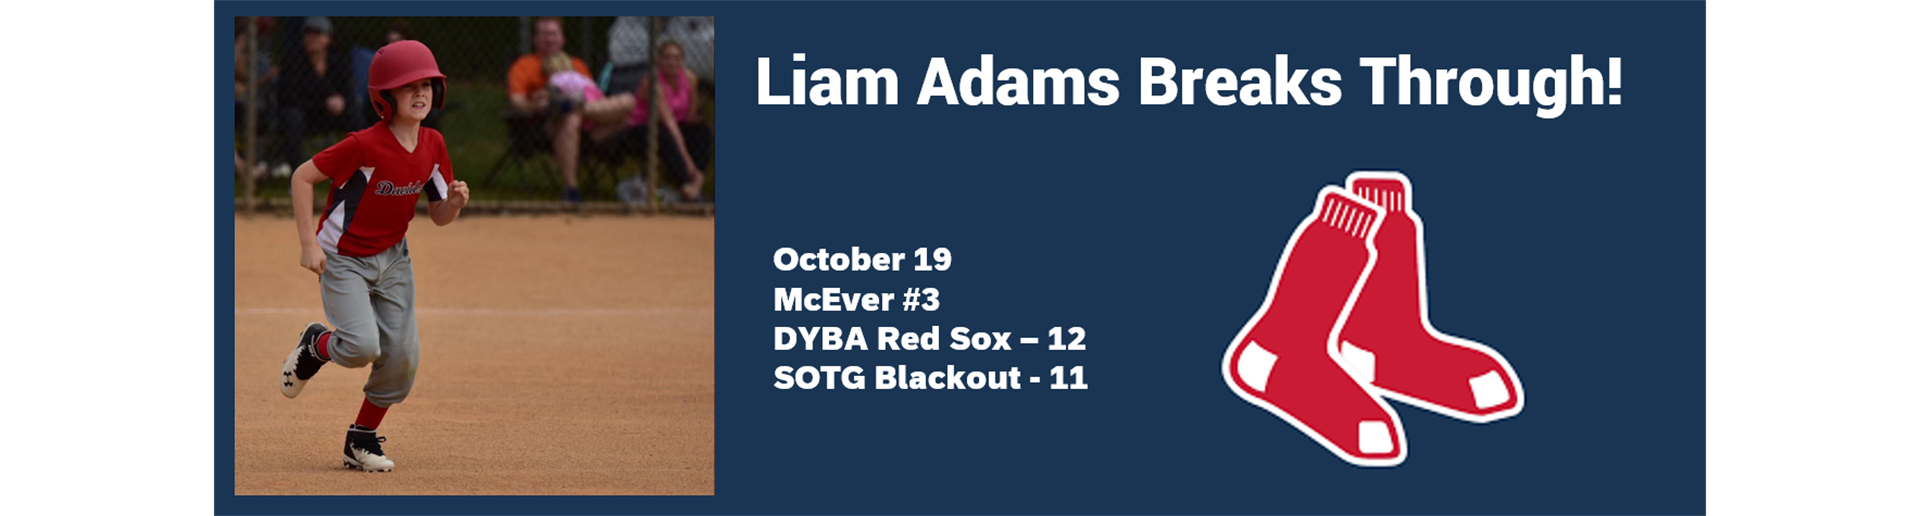 Liam Adams and the Red Sox Undefeated!